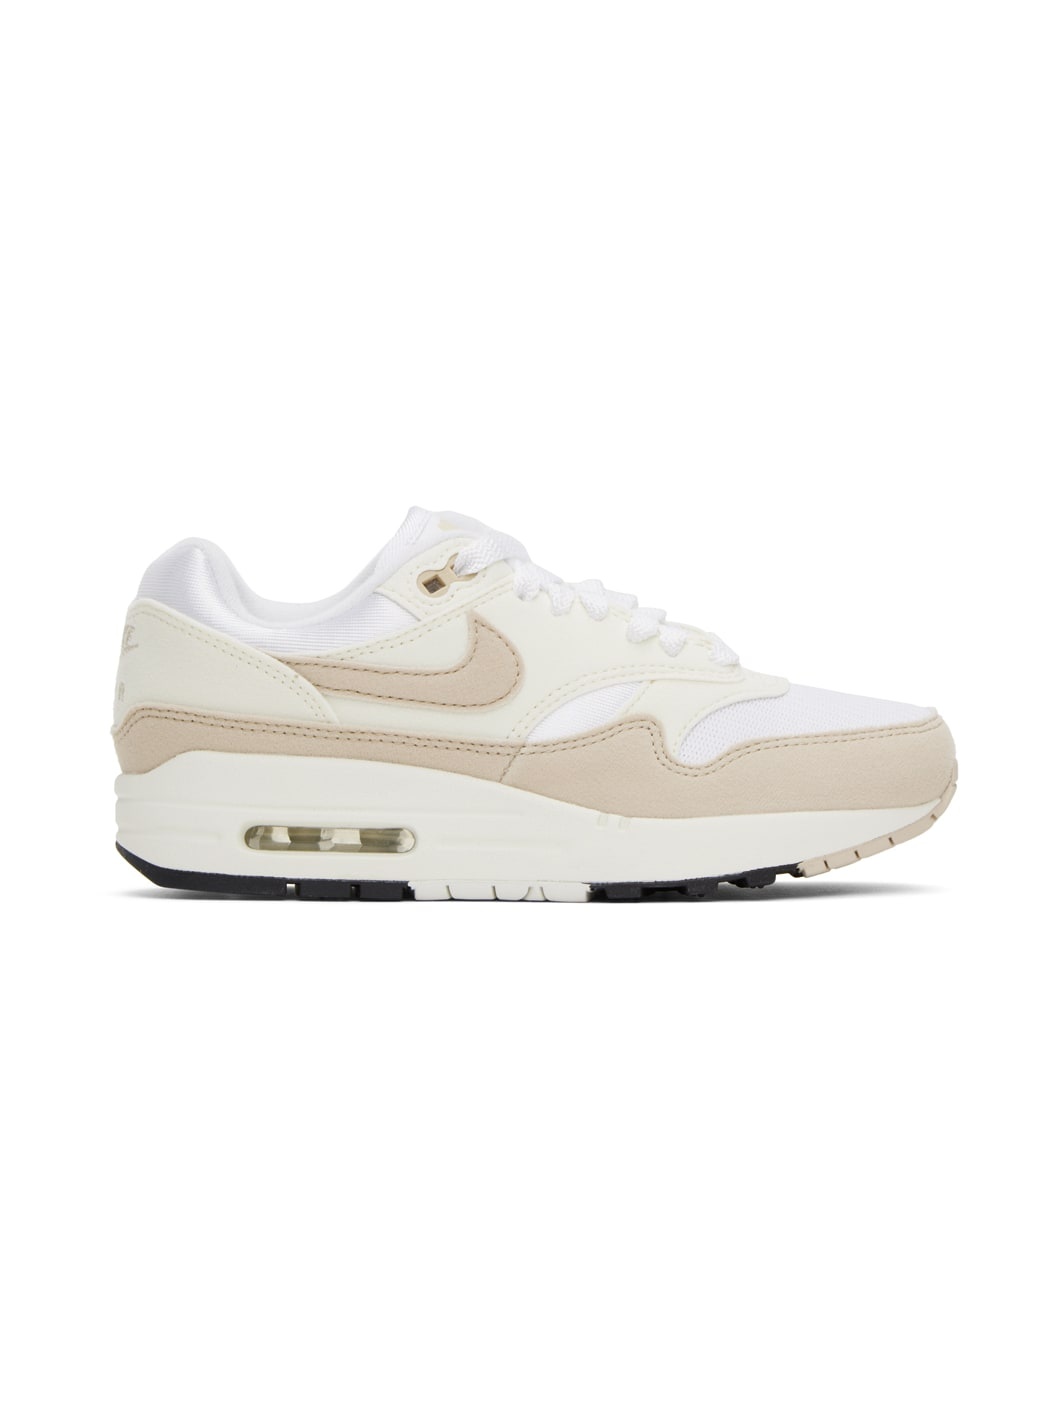 White & Beige Air Max 1 Sneakers - 1